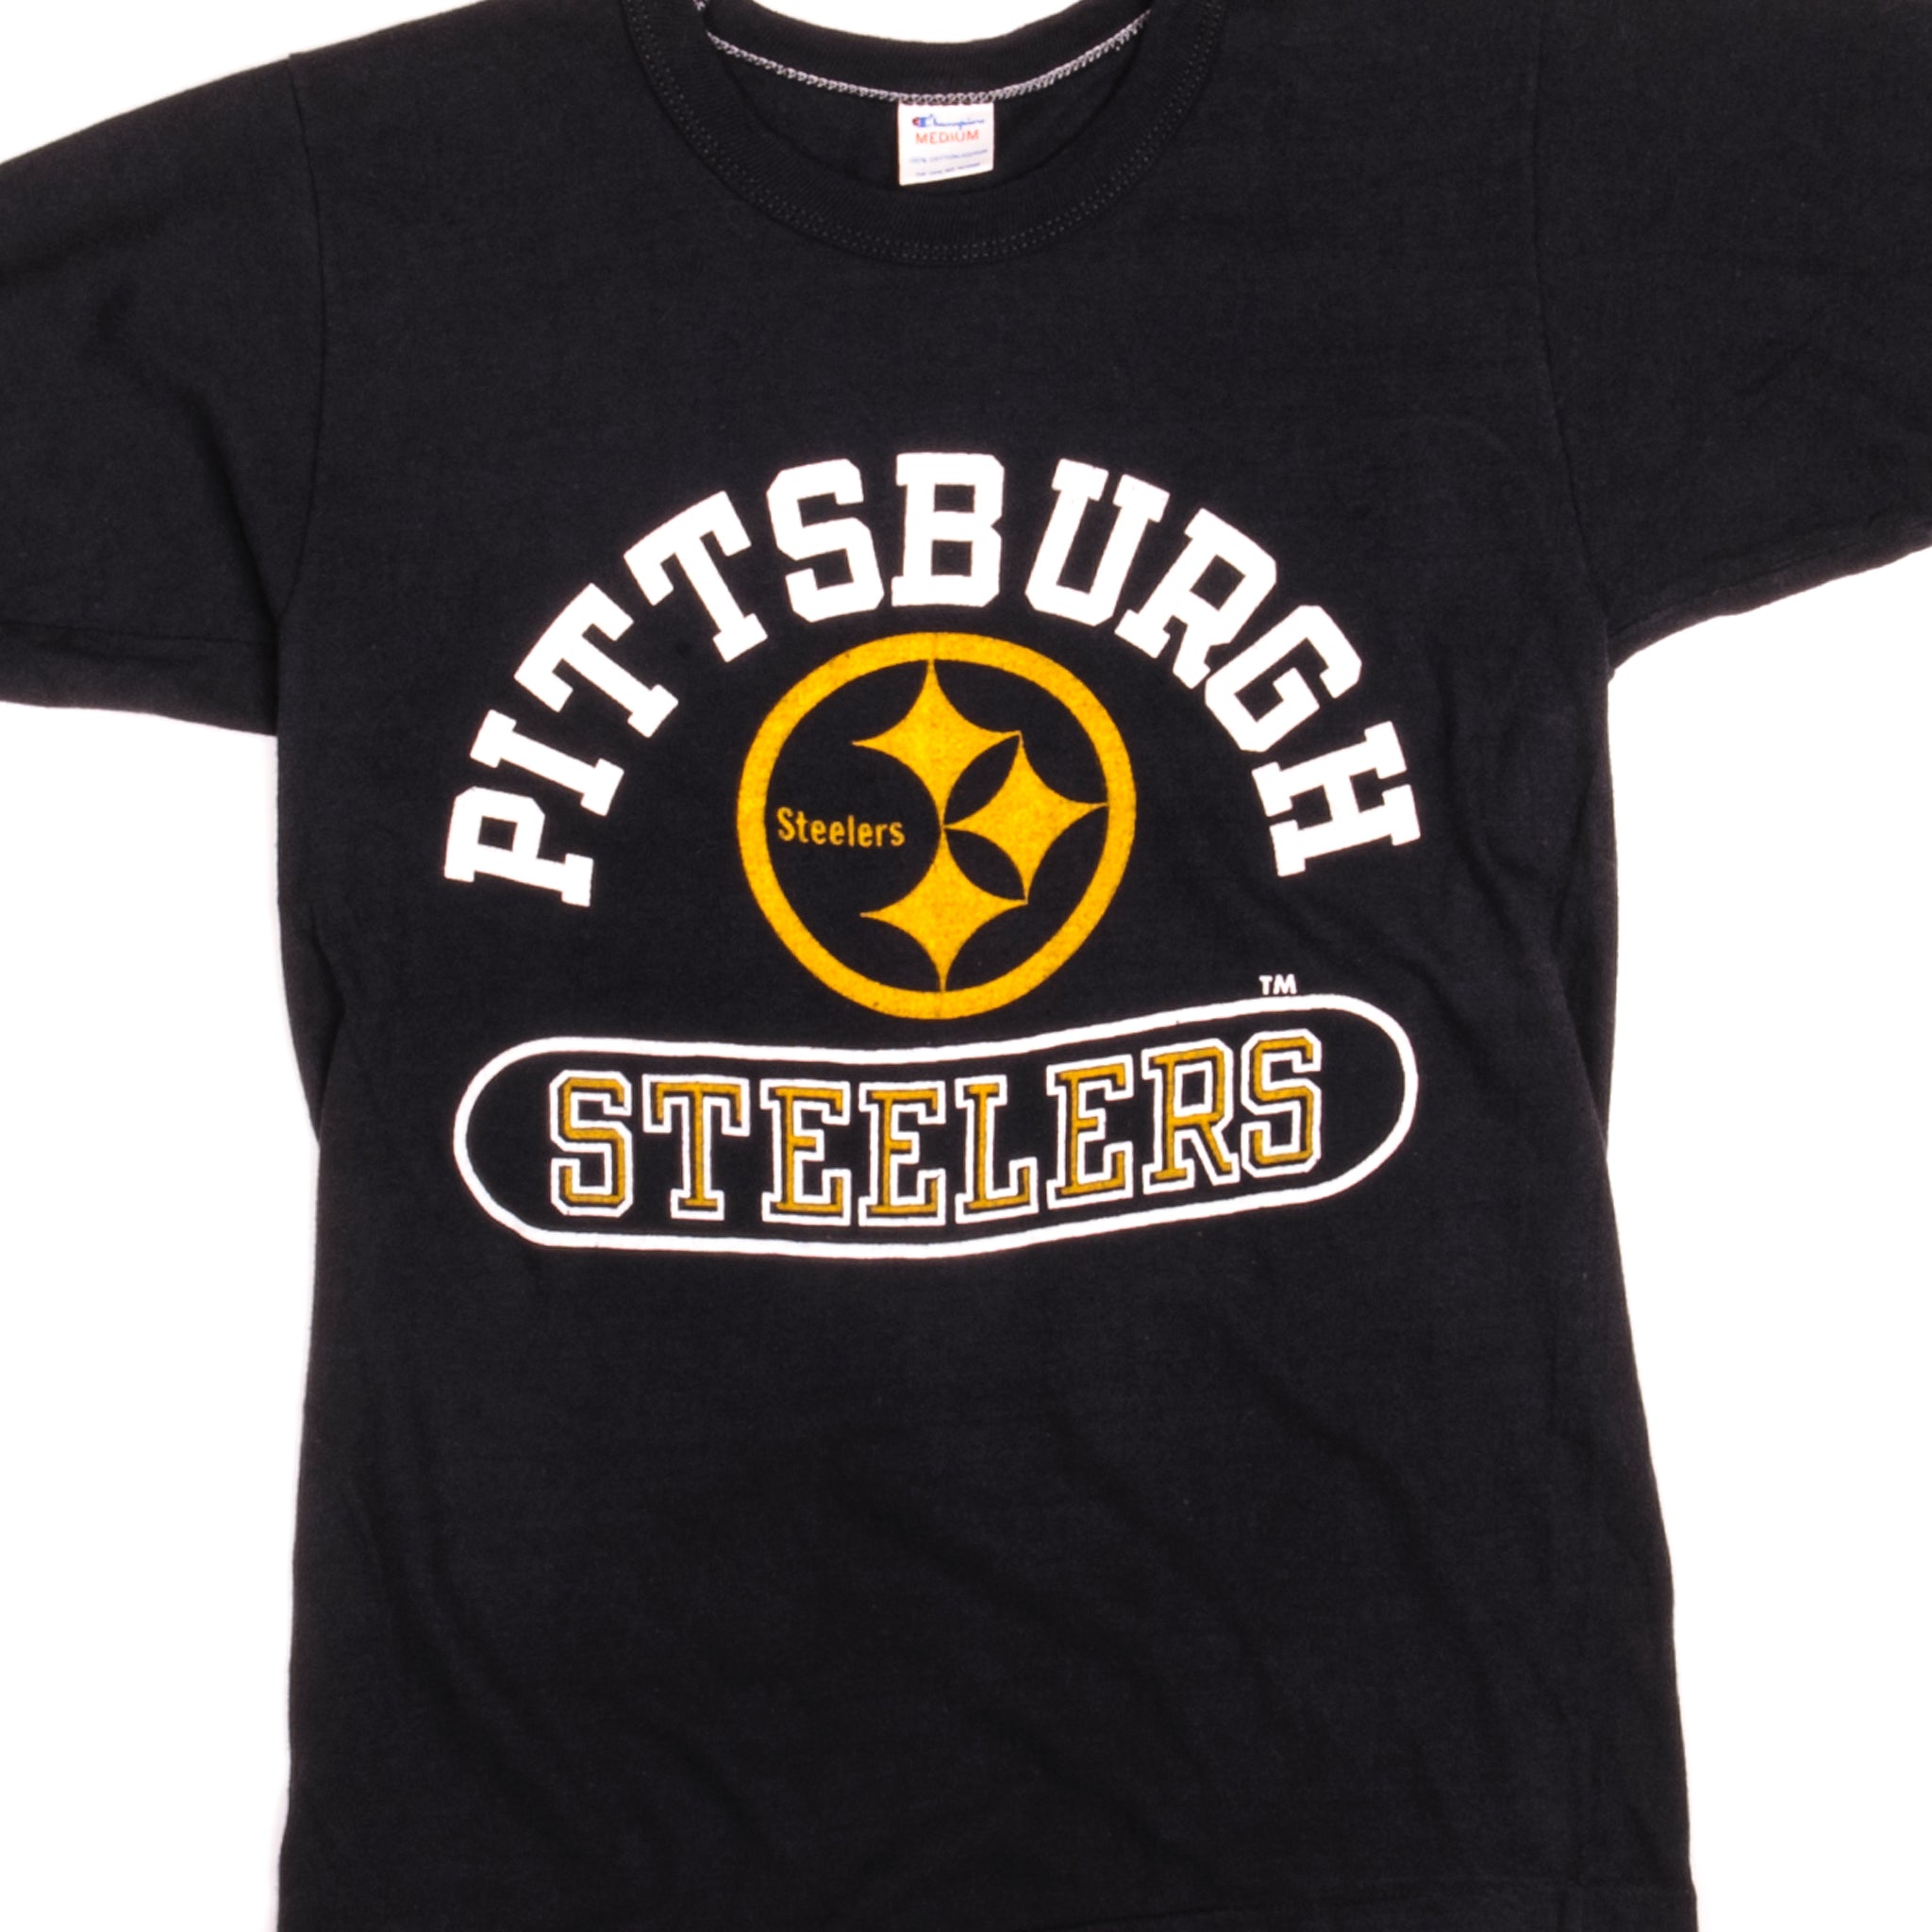 Pittsburgh Steelers Tshirt Women Size XL 2008 Conference Champs